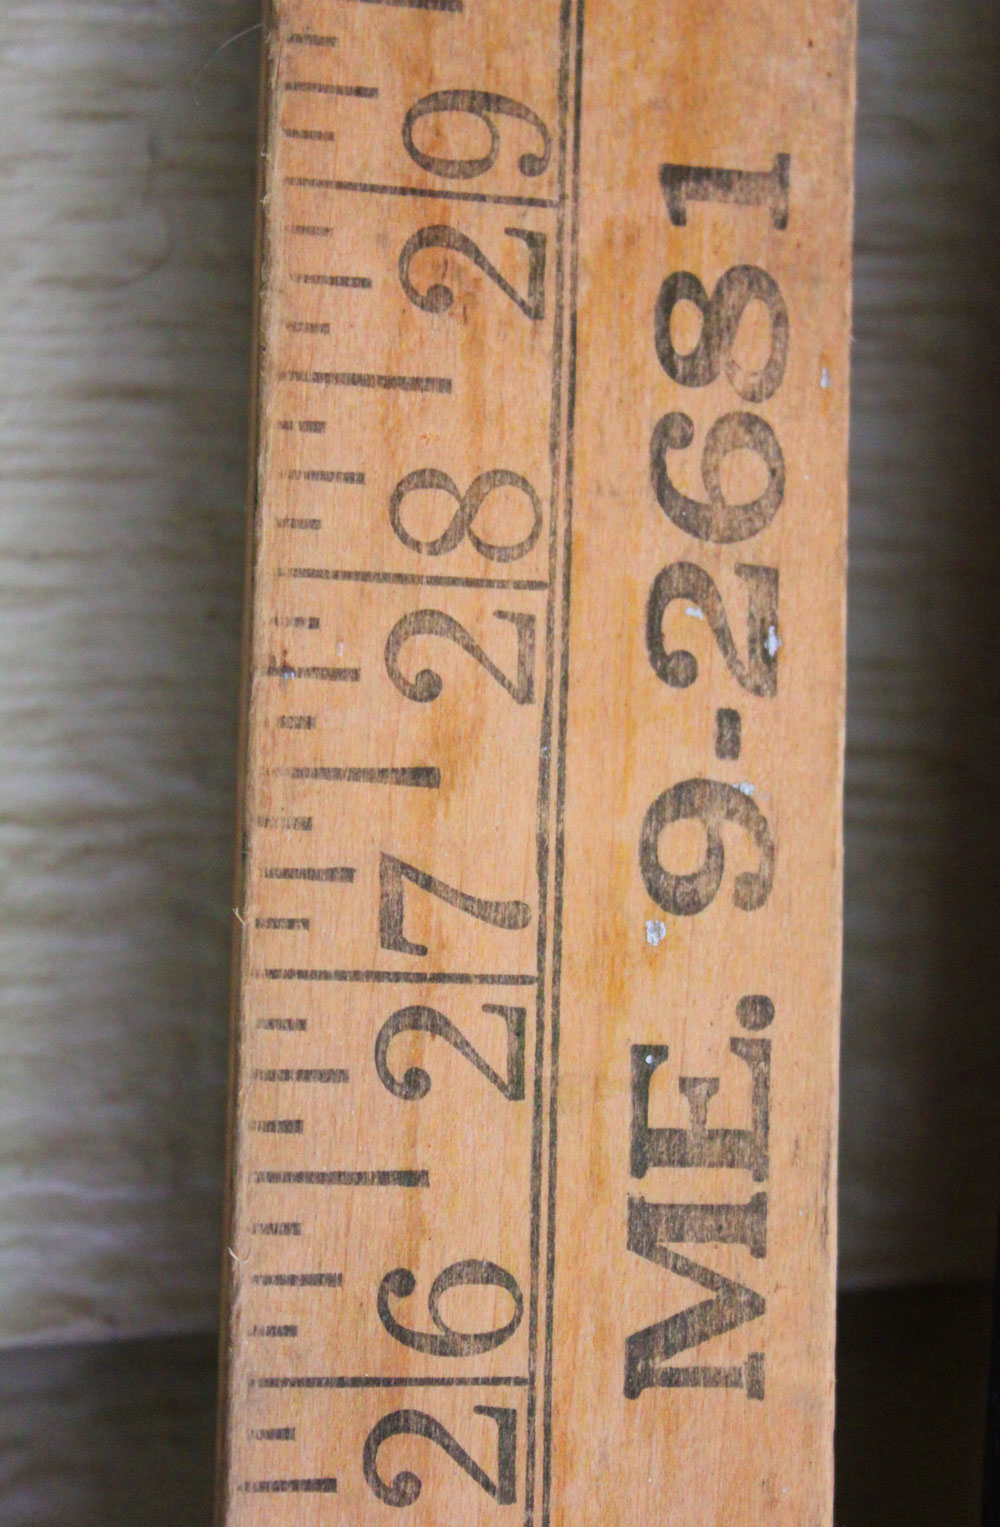 Vintage Yardsticks - Itsy Bits and Pieces